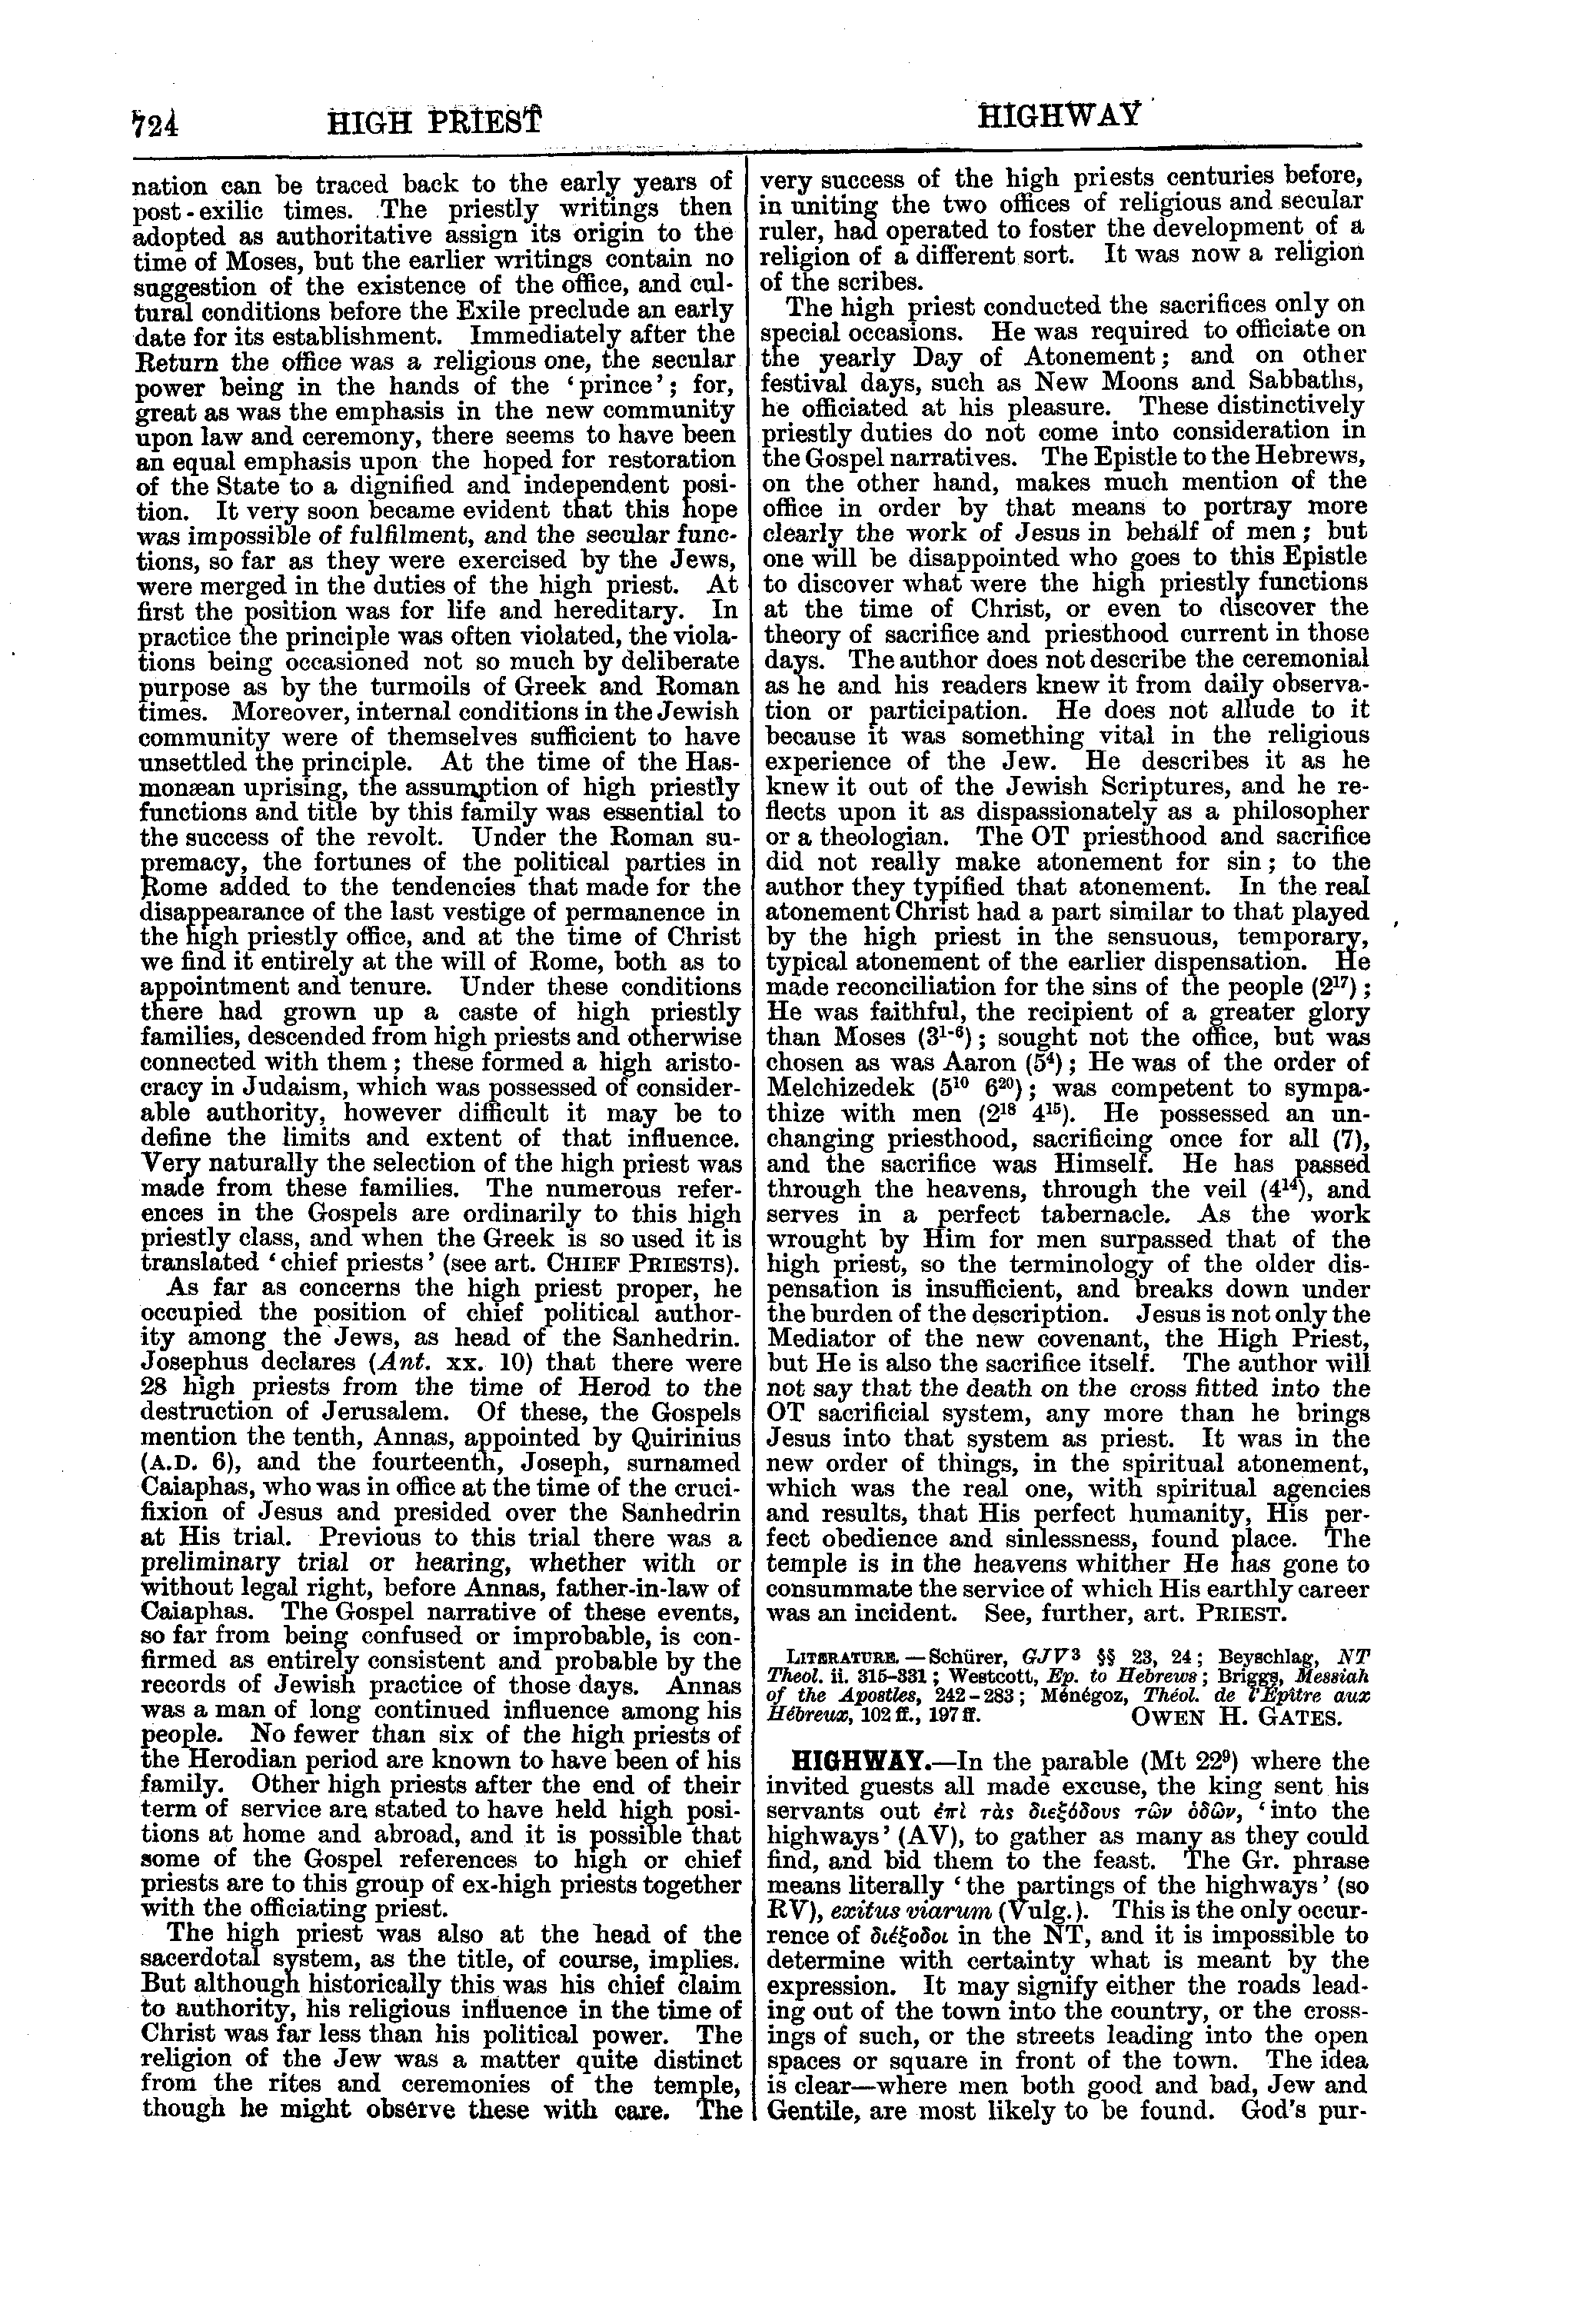 Image of page 724